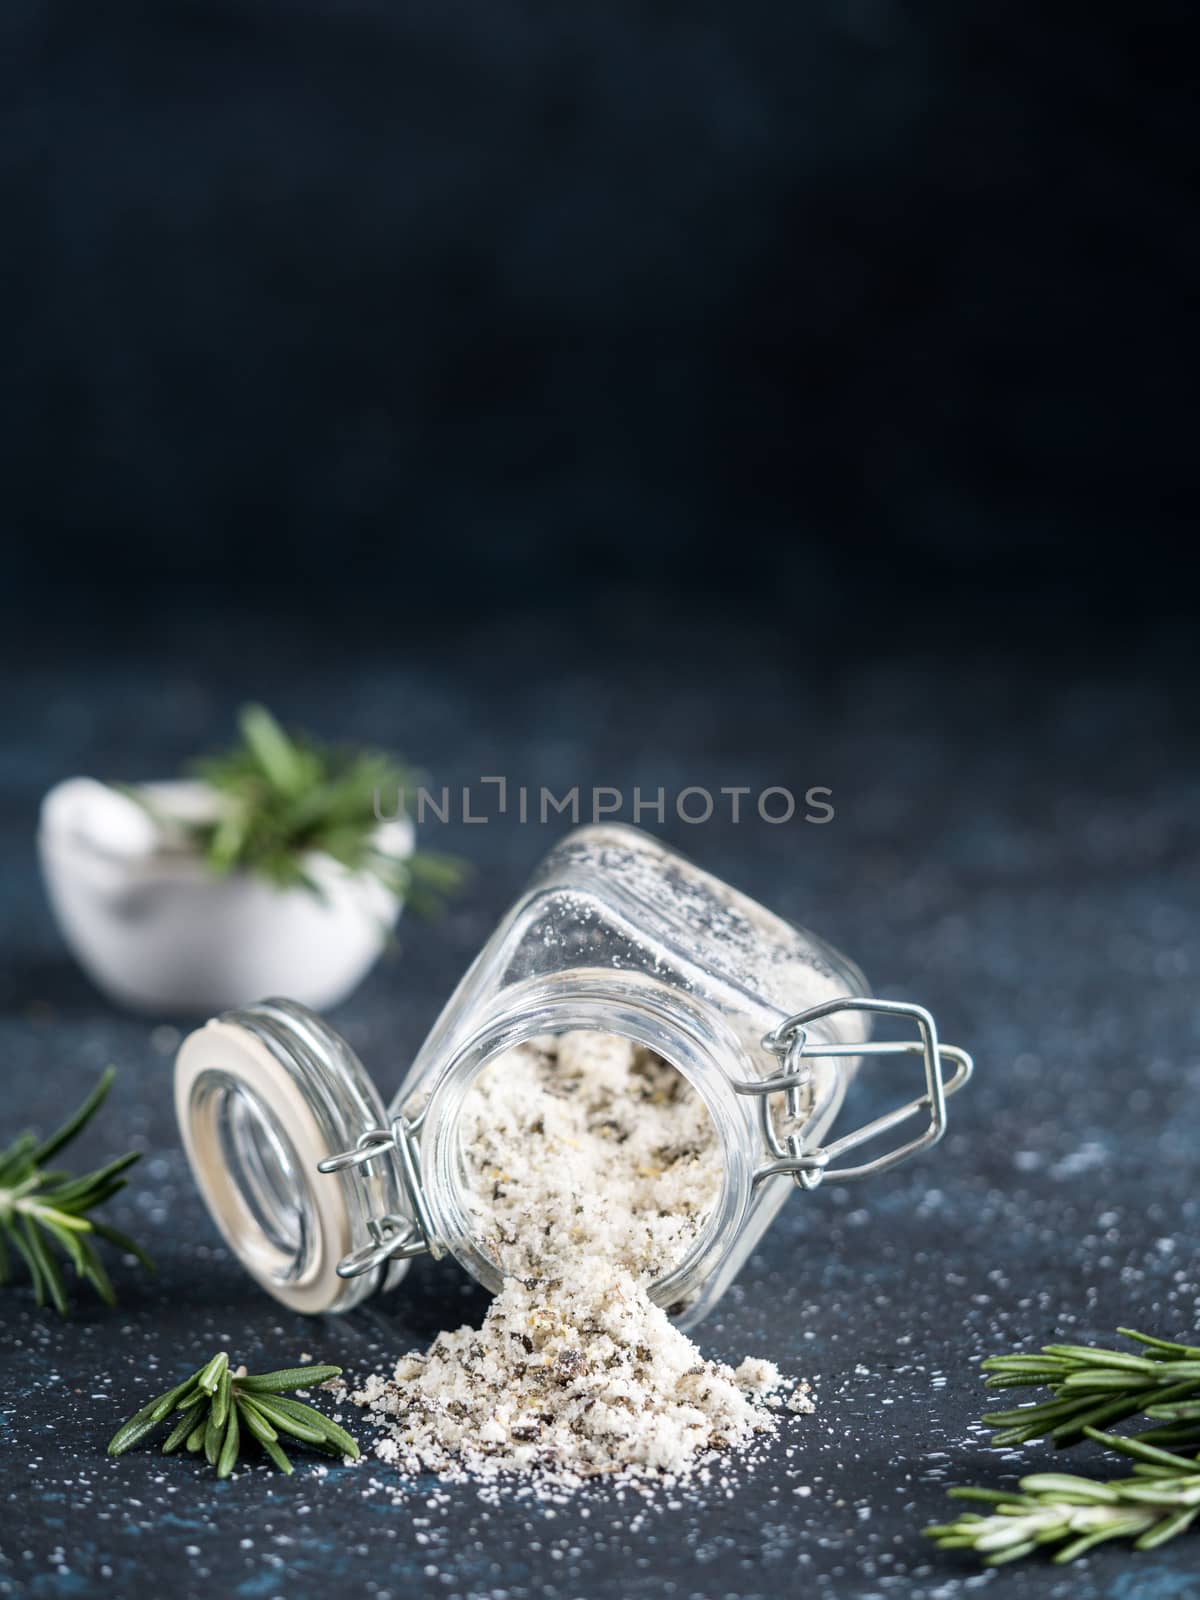 Sea salt scented herb rosemary and lemon zest. Sea salt with aromatic herb spilled out of glass jar on dark blue background. Scented salt and ingerdients. Copy space